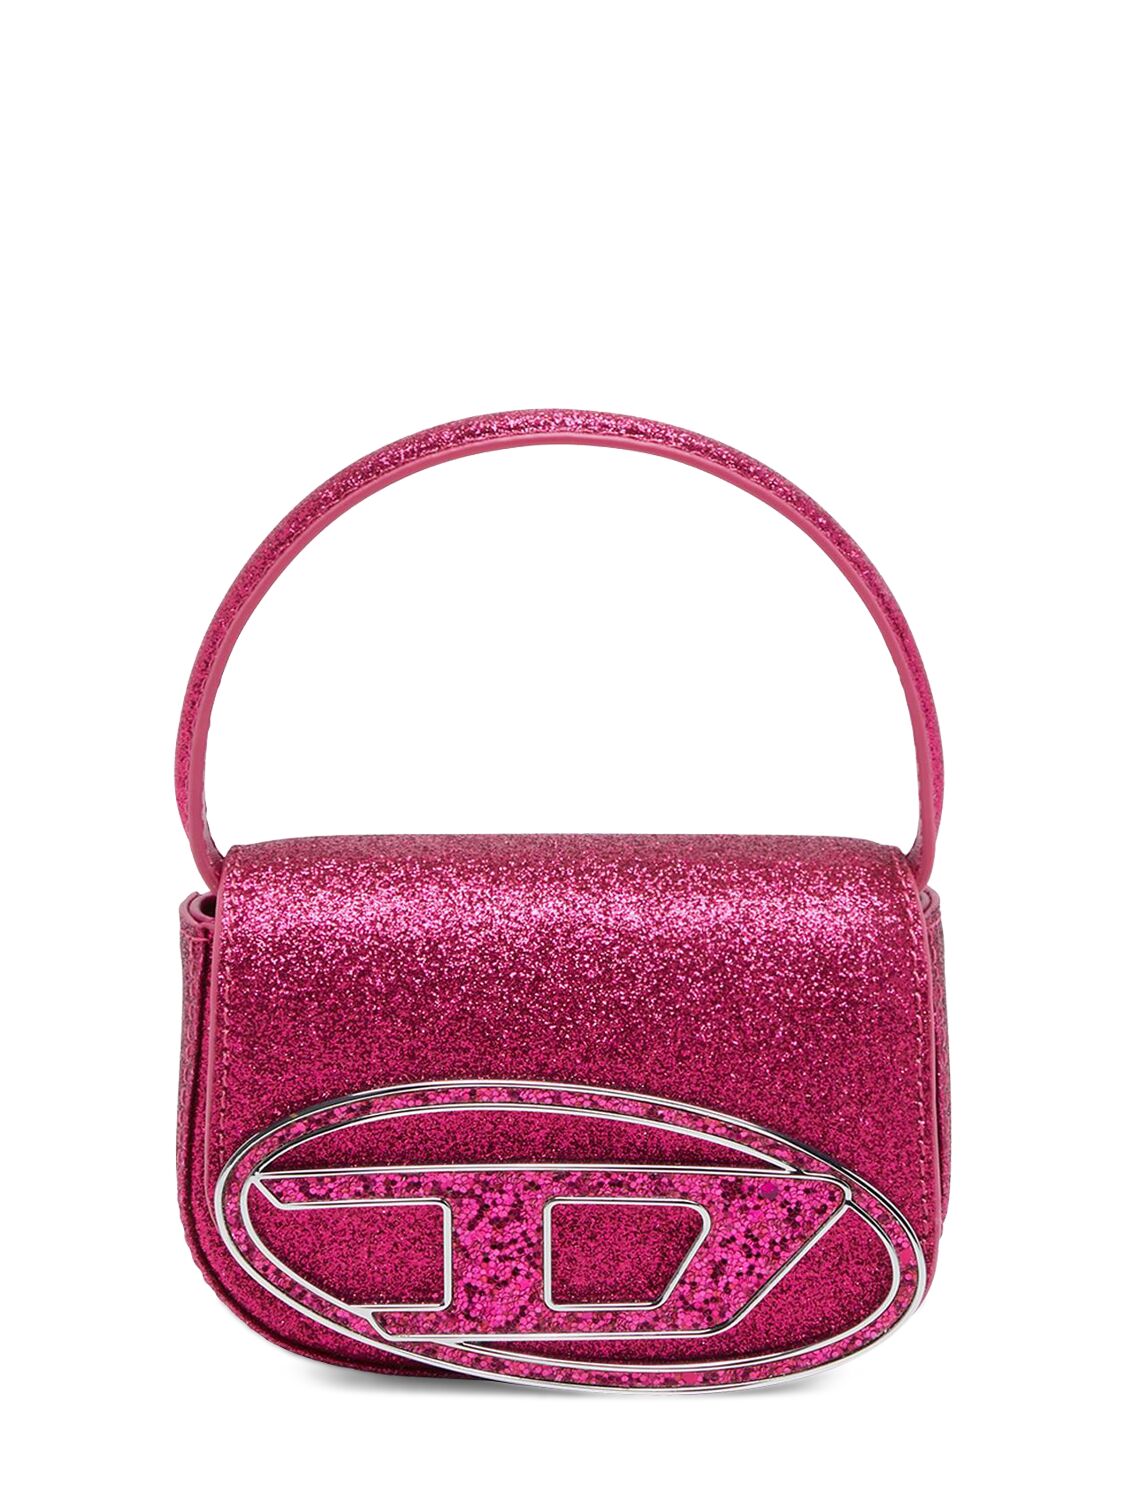 Image of Xs 1dr Glittered Top Handle Bag